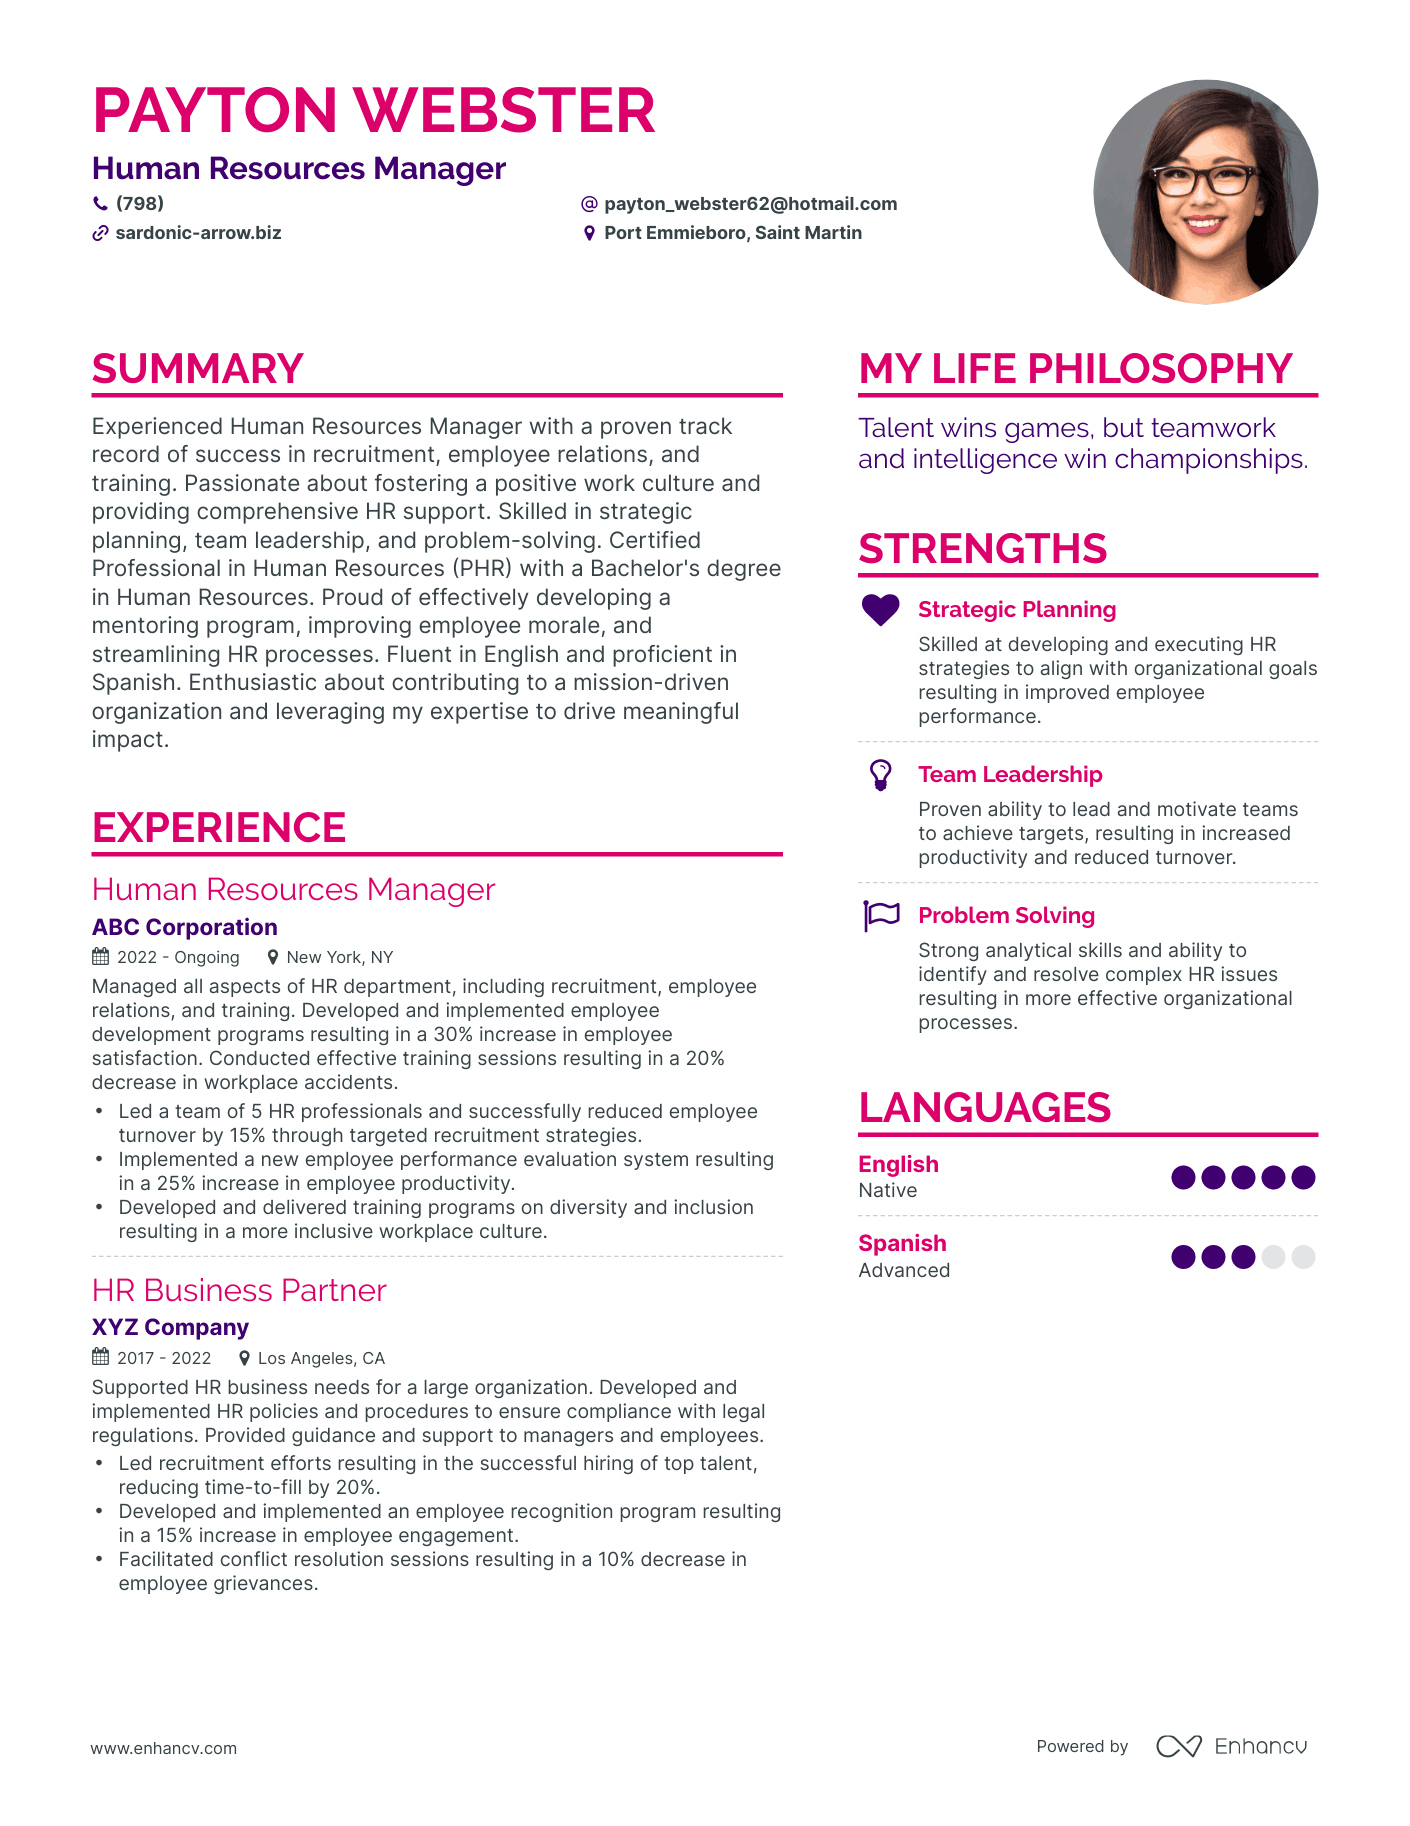 Human Resources Manager resume example